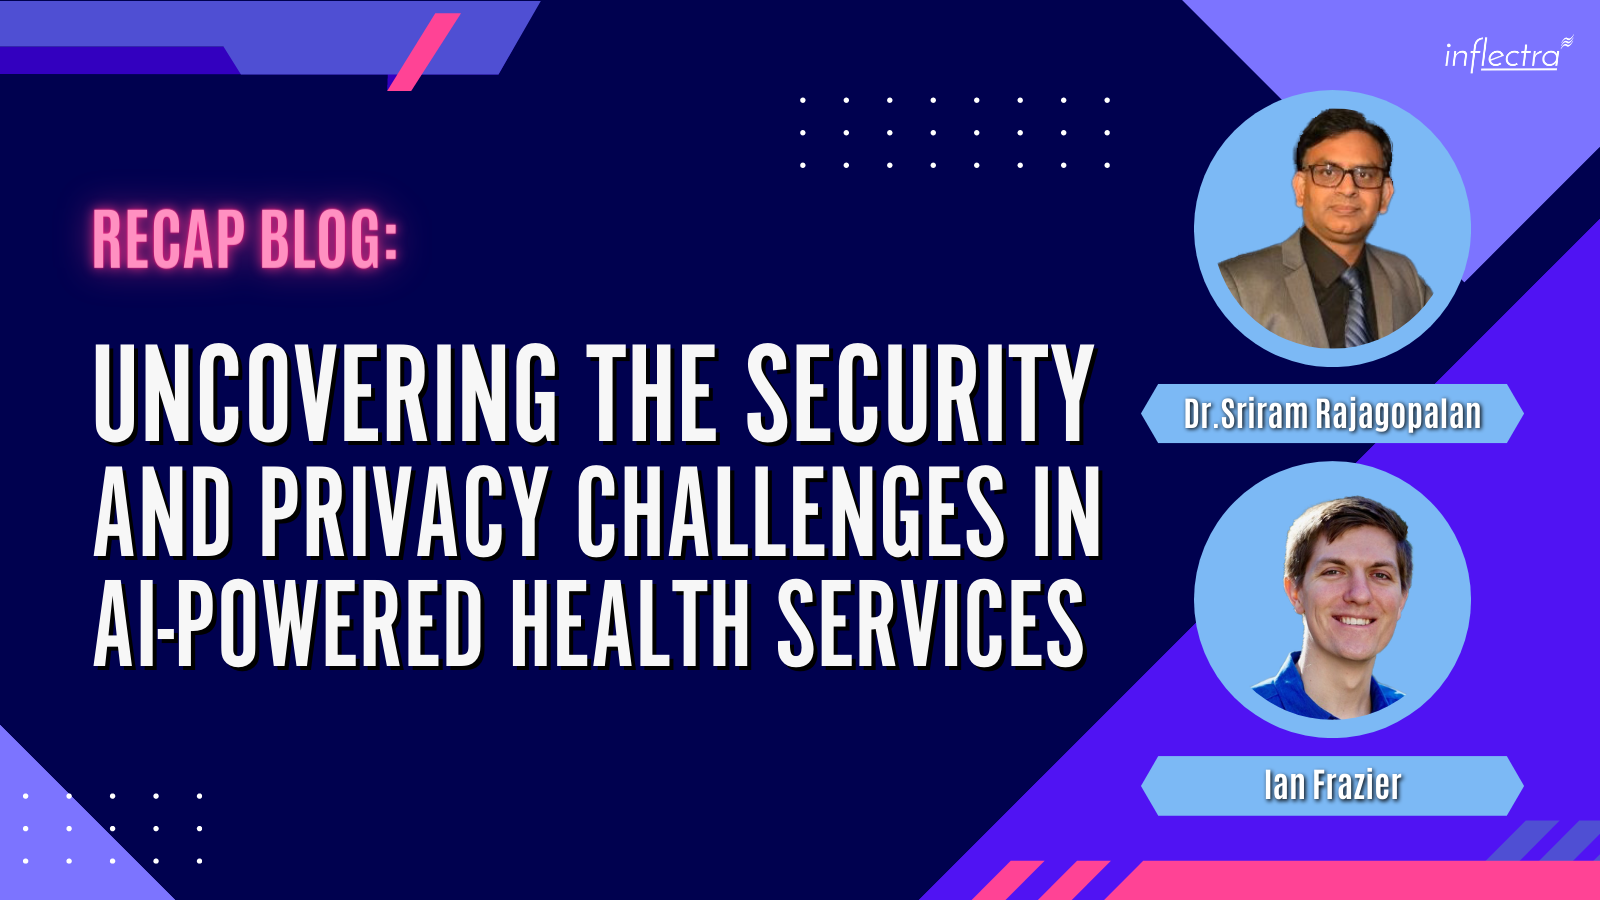 recap-blog-uncovering-the-security-and-privacy-challenges-in-ai-powered-health-services-inflectra-image